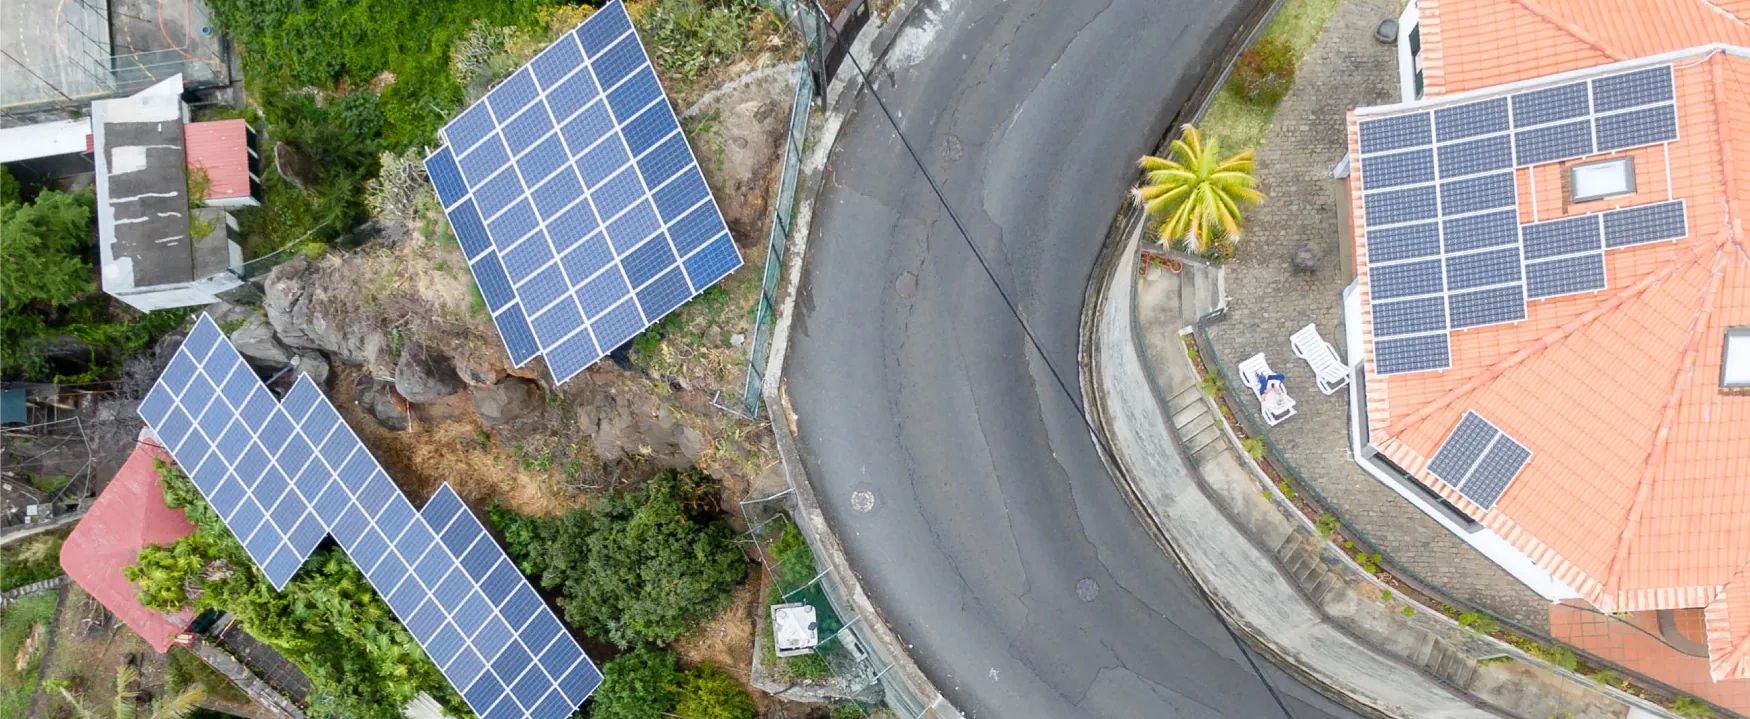 An aerial photograph shows houses on a tropical hillside with solar panels on their roofs.